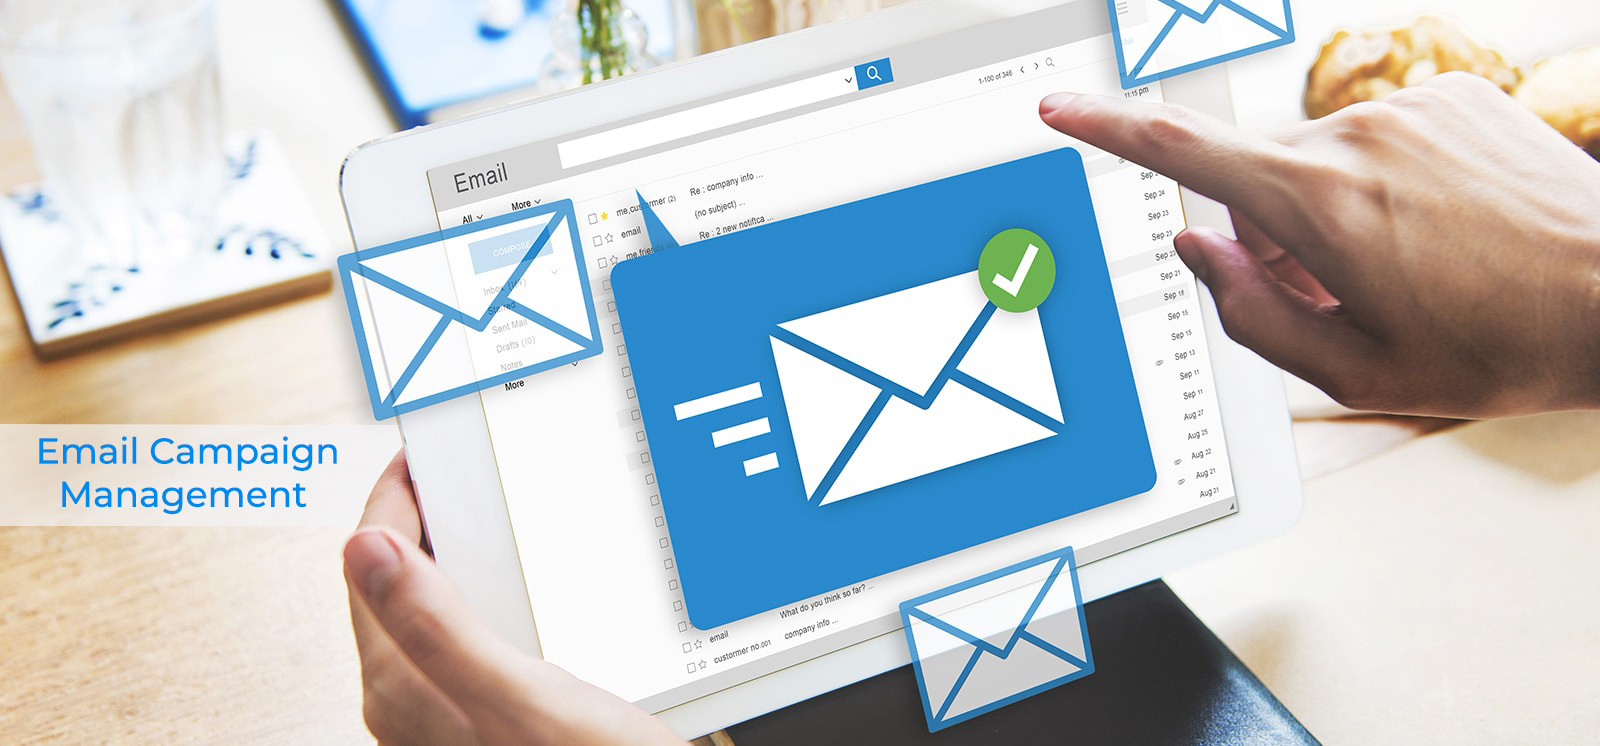 Some Useful Tips for Email Campaign Management